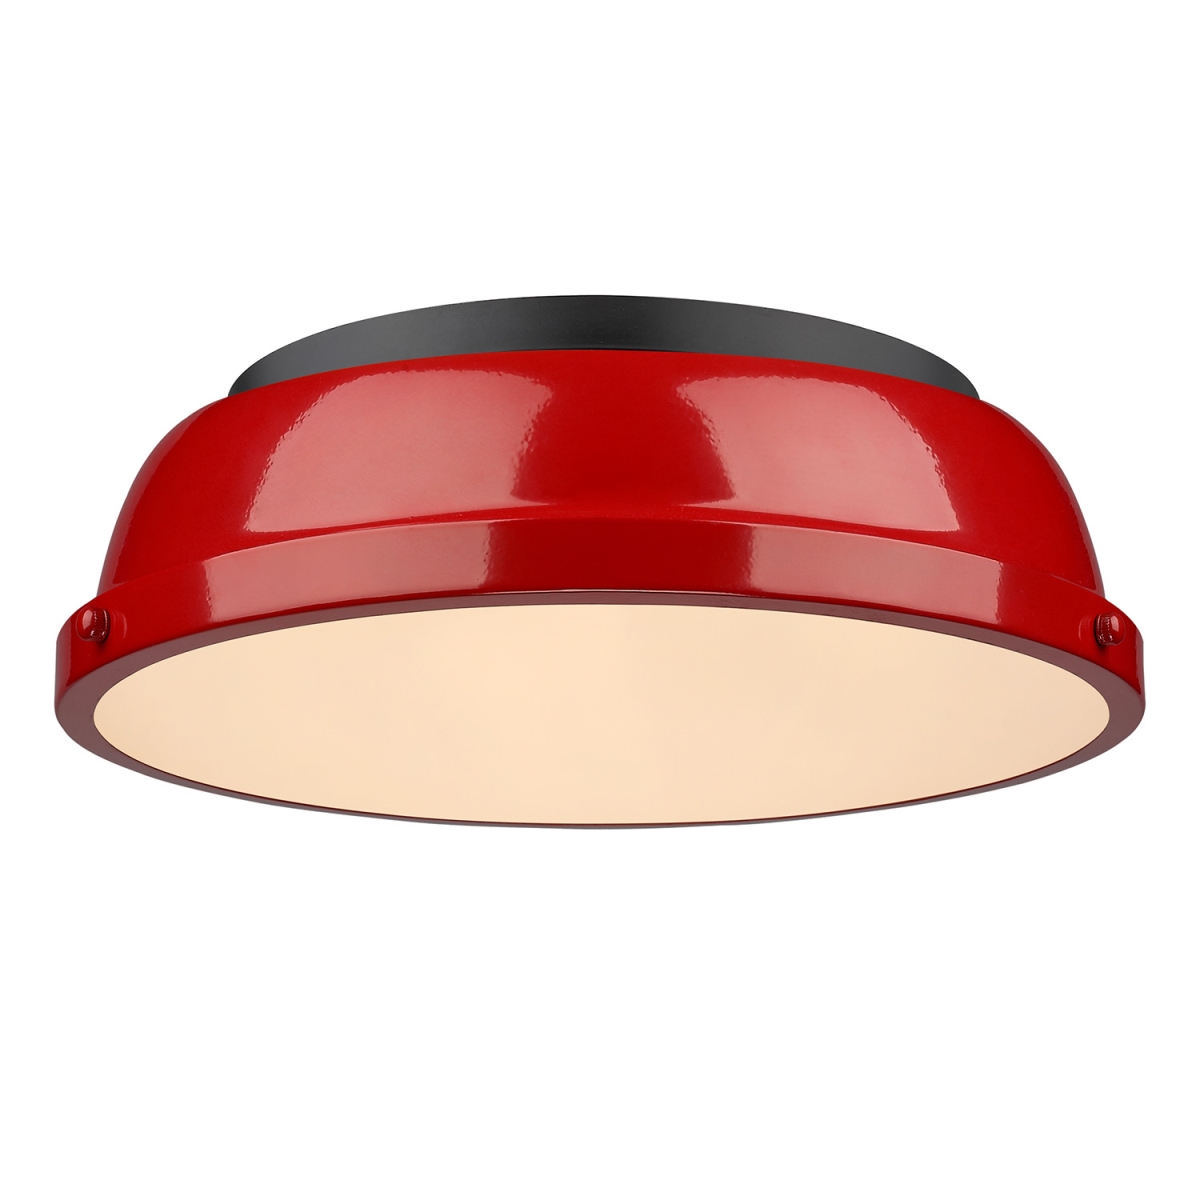 3602-14 Blk-rd Duncan 14 In. Flush Mount Light With Red Shade, Black